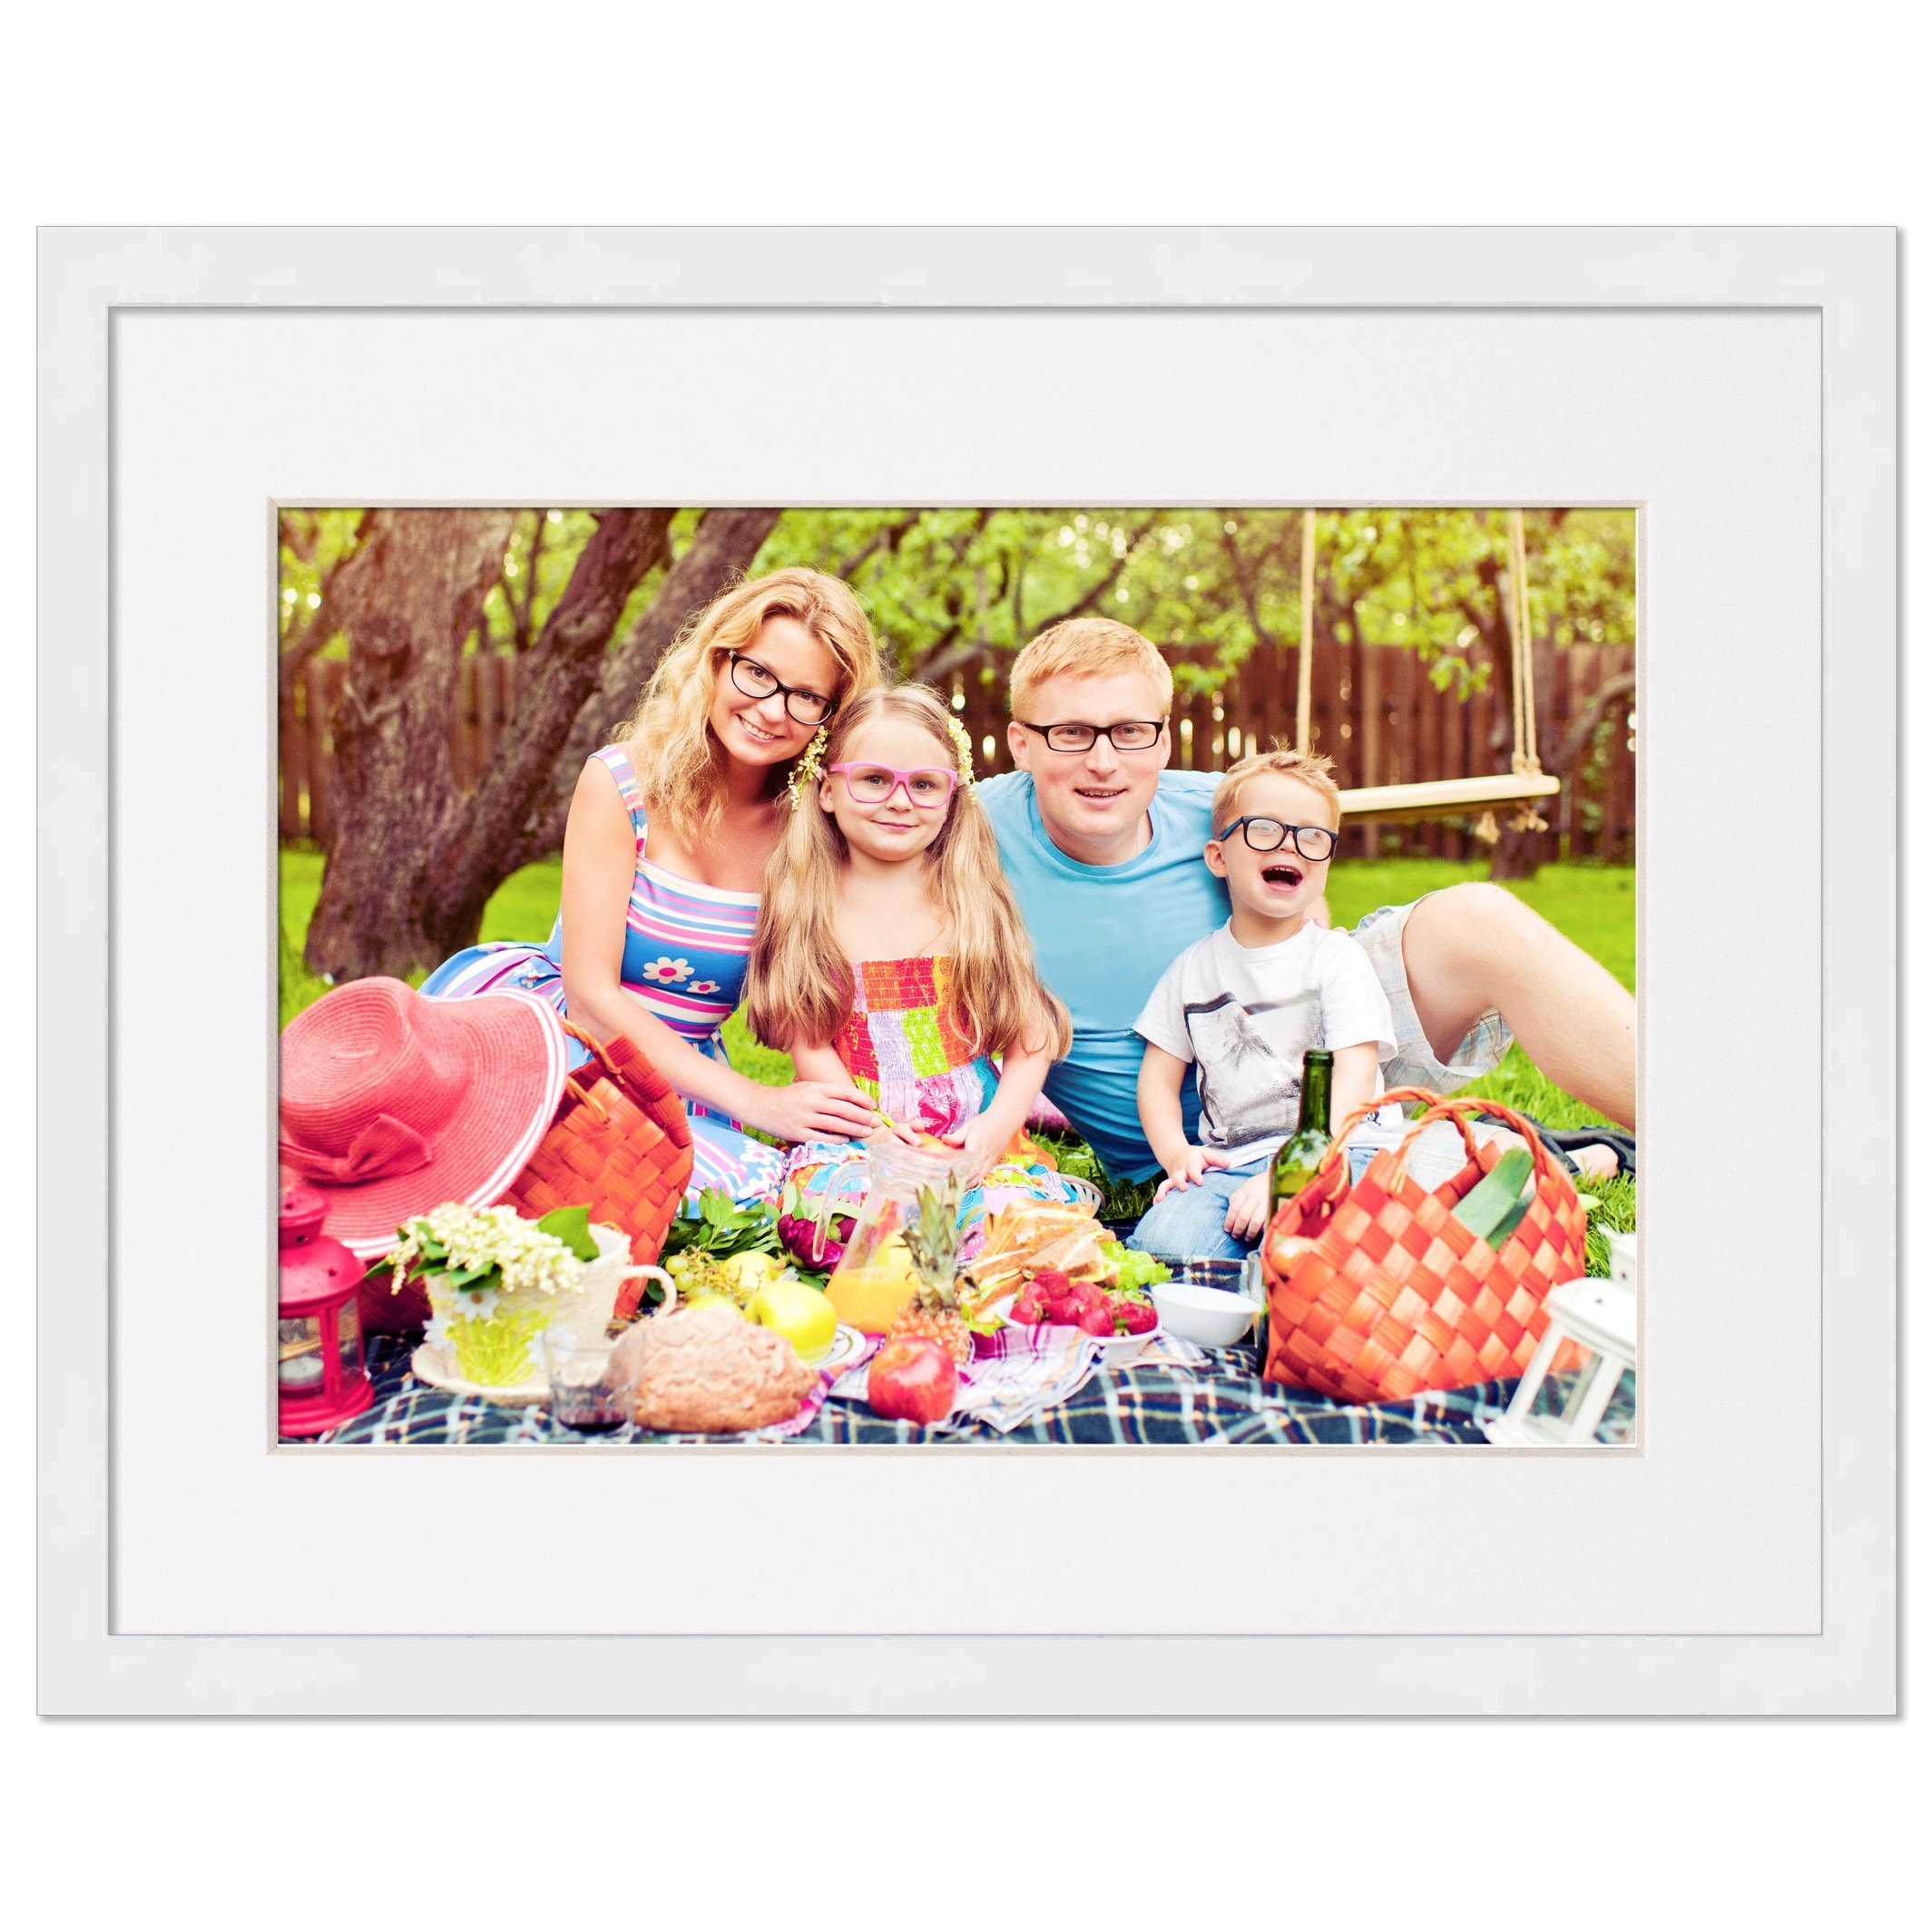 18x24 Mat for 13x19 Photo - Textured Cream Matboard for Frames Measuring 18  x 24 In- To Display Art Measuring 13 x 19 Inches - Bed Bath & Beyond -  38877416